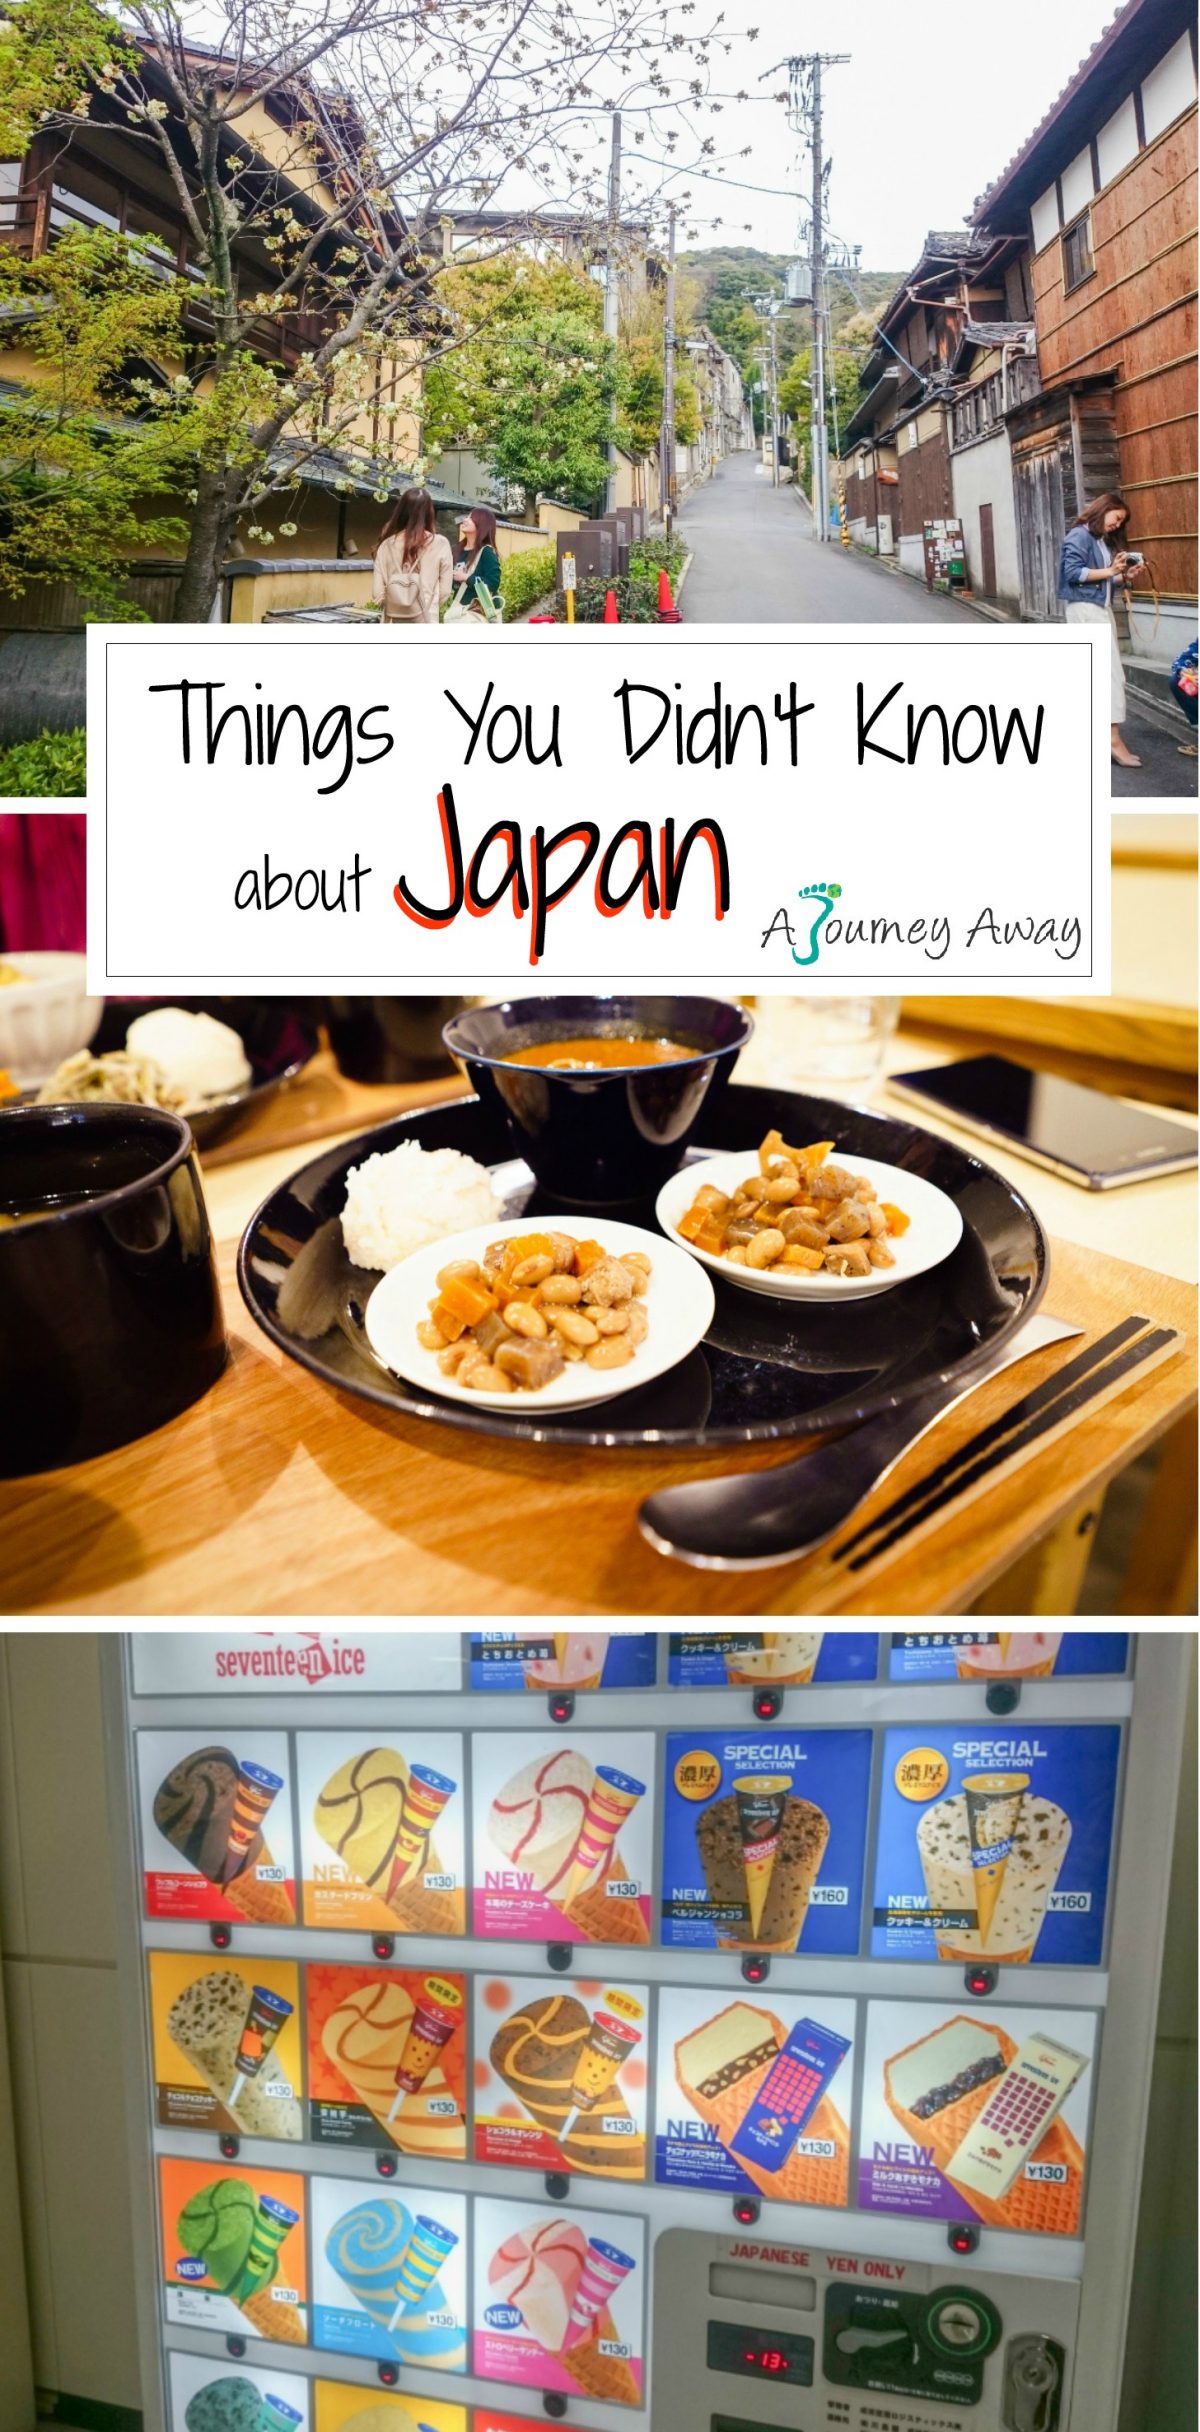 Things that you Didn’t Know about Japan | A Journey Away travel blog